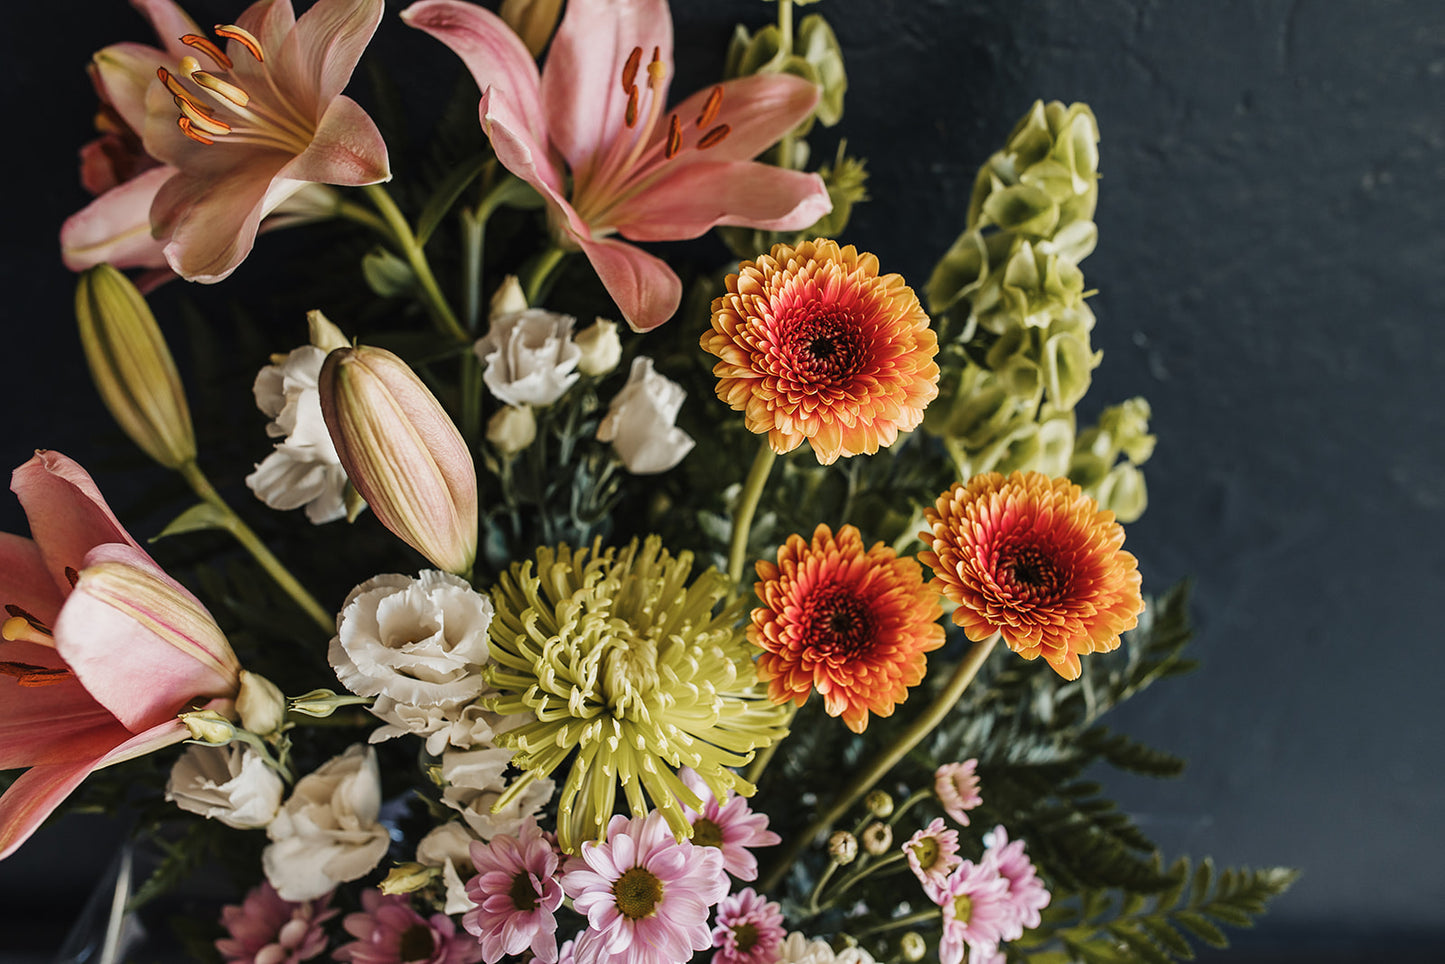 A view of the arrangement from above showing open lillies, gerberas, lisianthus, a spider chrysanthemum and daisy chrysanthemums